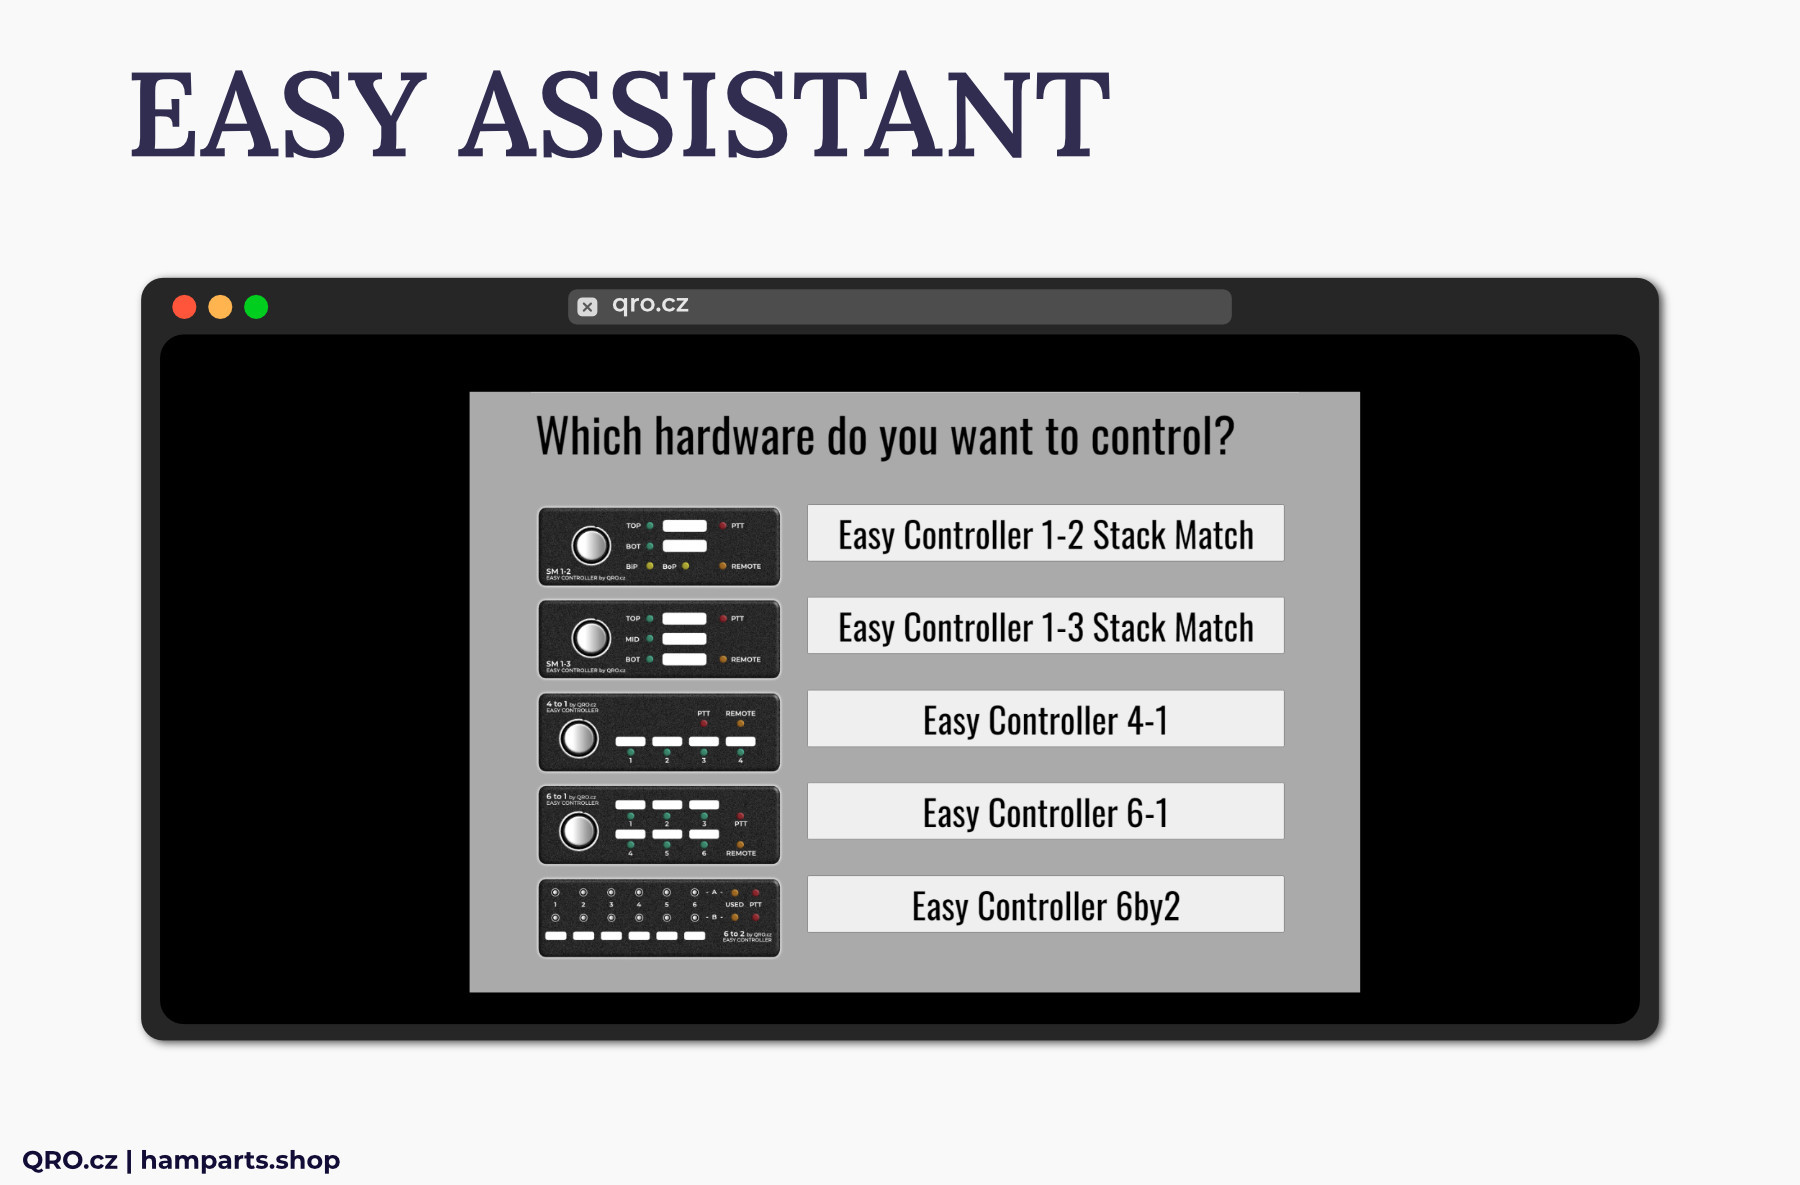 remote control example of easy assistant the guide for set up your devices qro.cz hamparts.shop